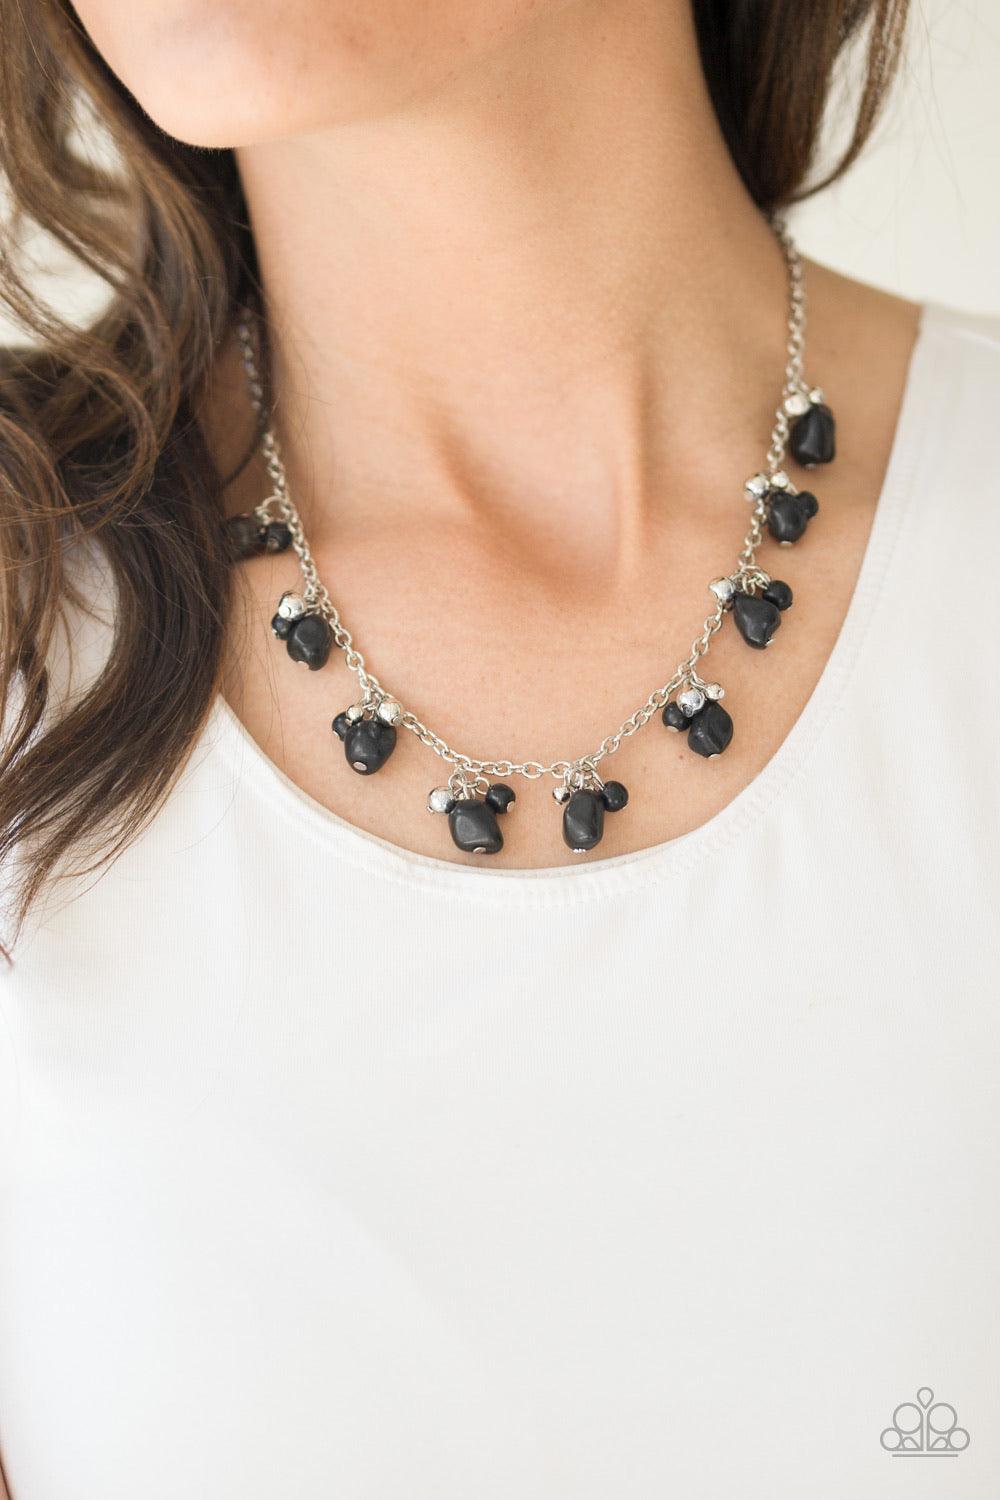 Paparazzi Accessories Rocky Mountain Magnificent - Black Varying in shape and size, shiny silver beads and earthy black stone beading swing from the bottom of a shimmery silver chain, creating a colorful fringe below the collar. Features an adjustable cla